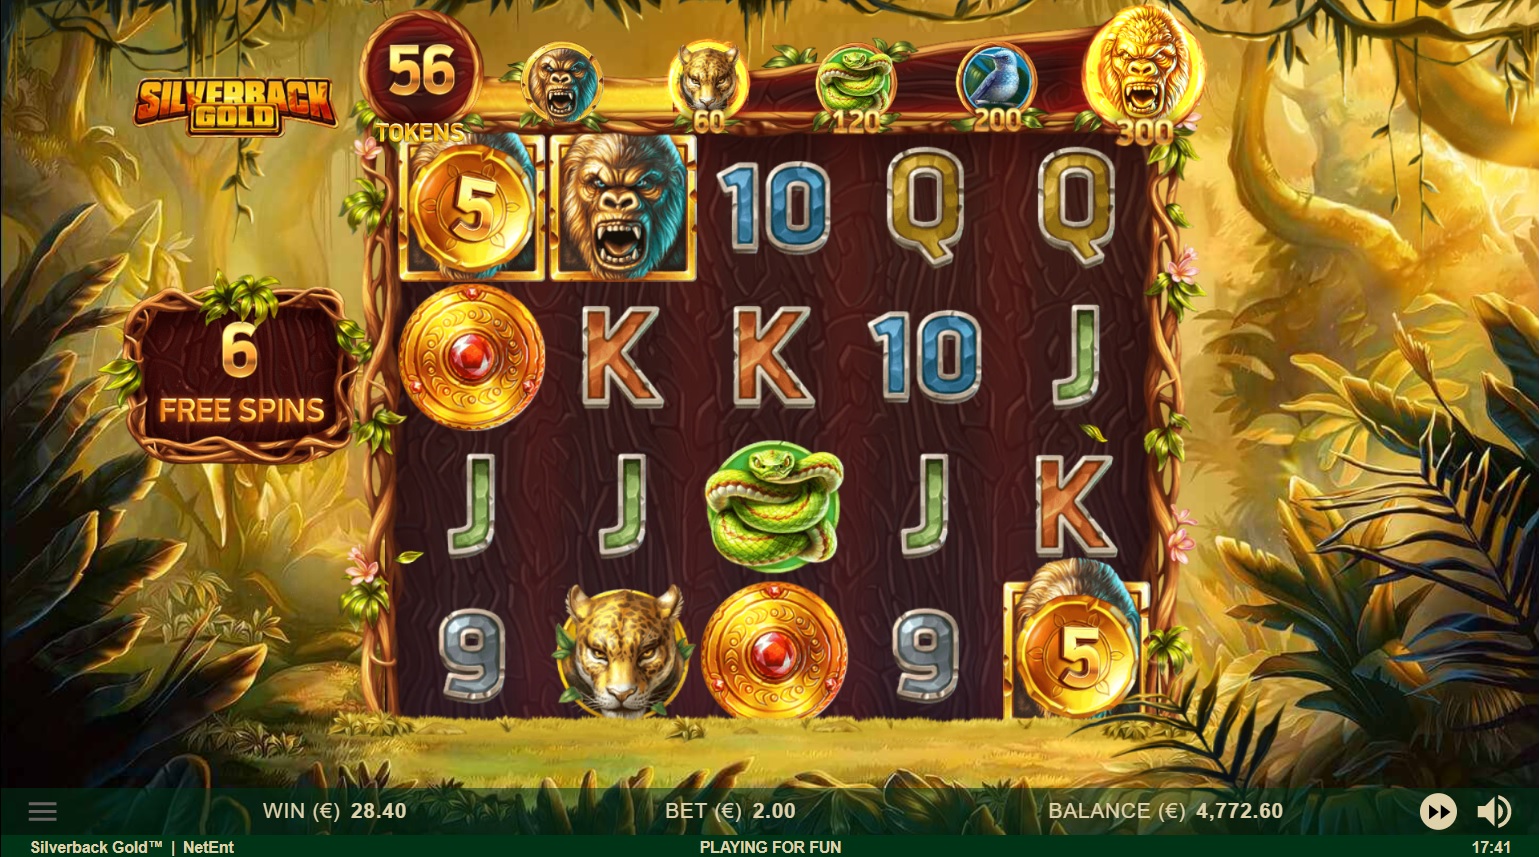 Silverback Gold, free spins feature